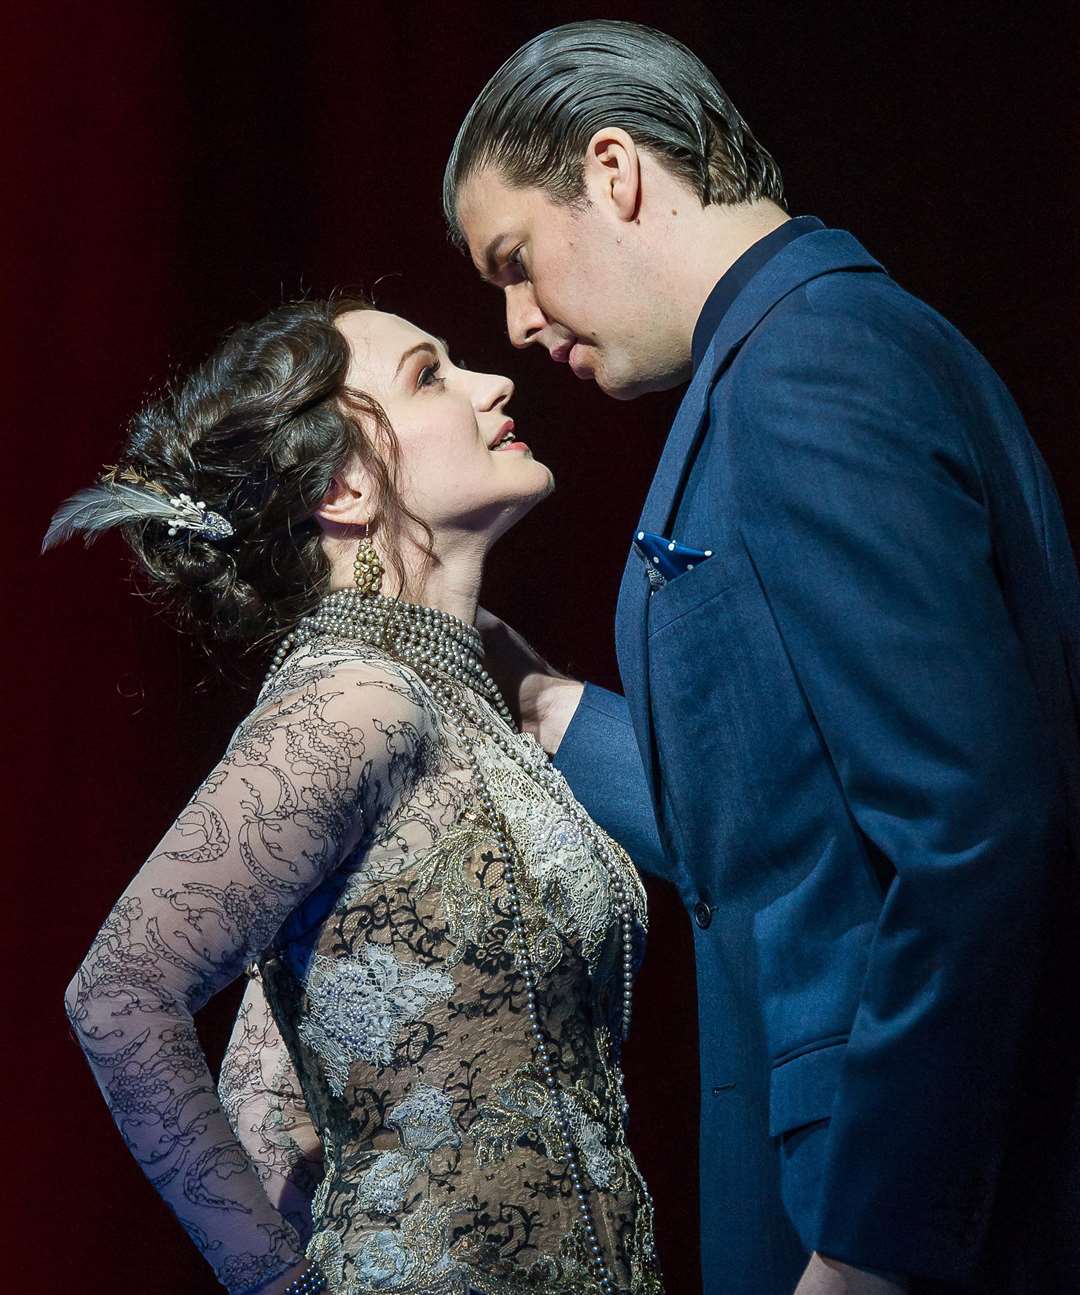 La Traviata by Verdi, performed by Glyndebourne Touring Opera Picture: Clive Barda